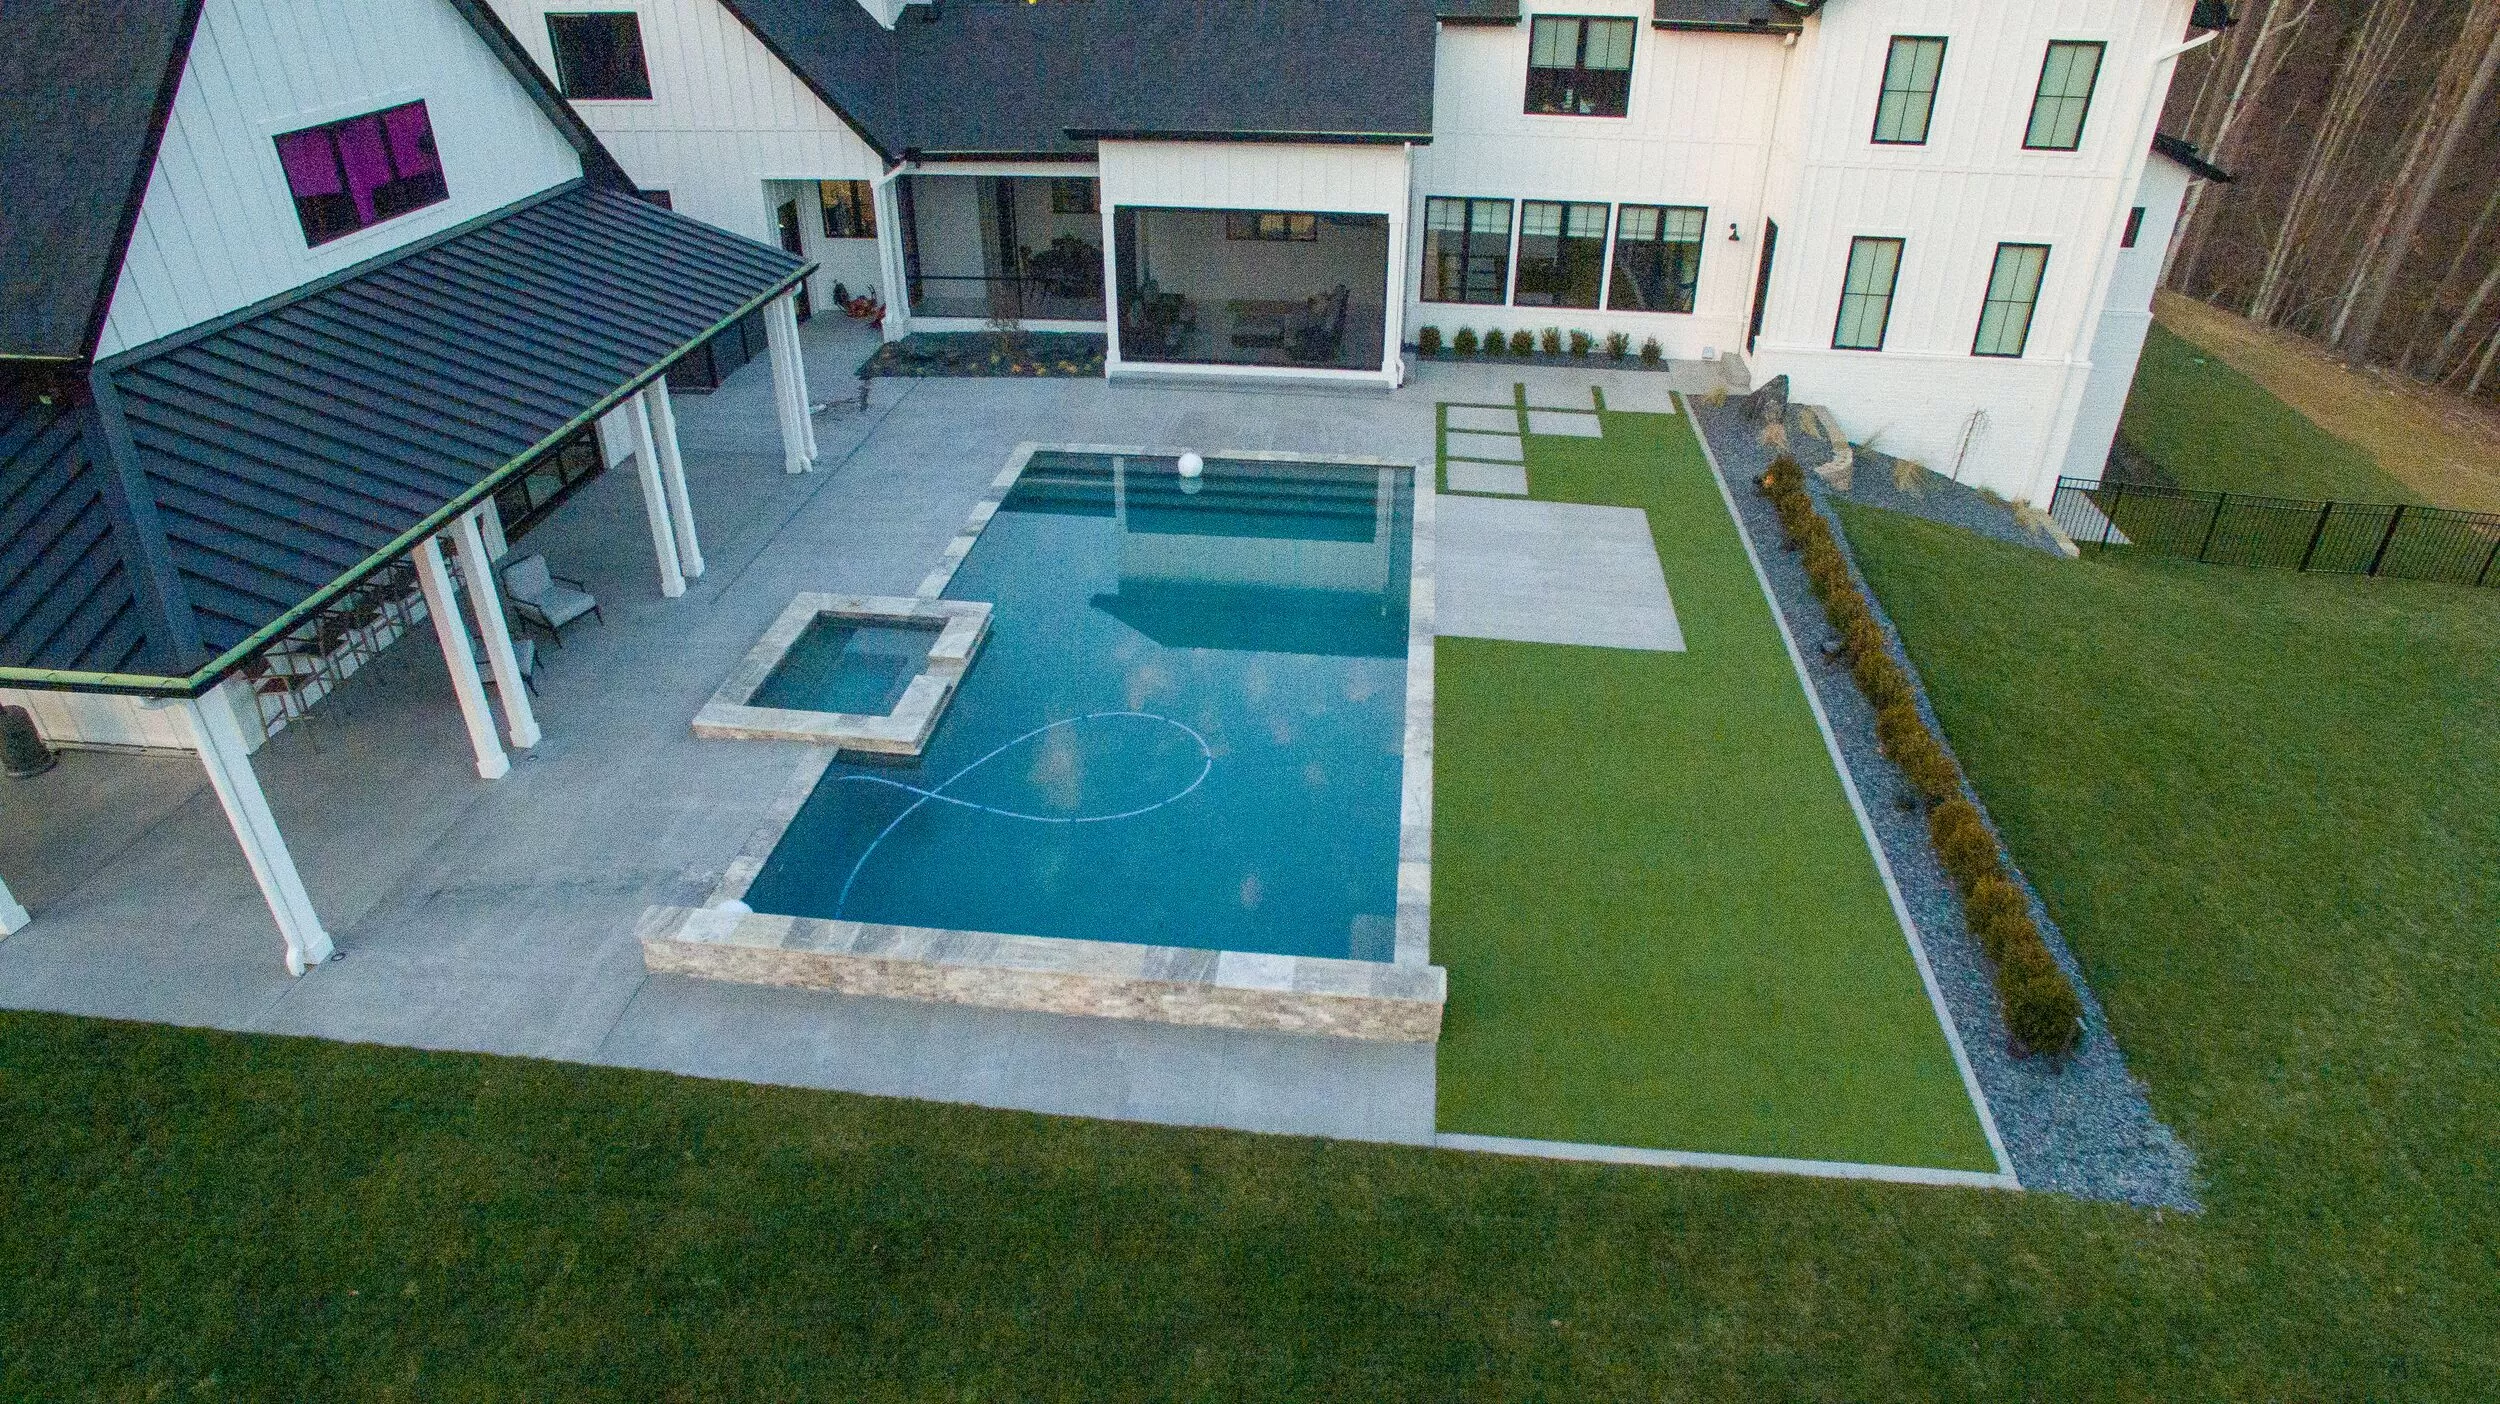 backyard house rendering with pool and lawn